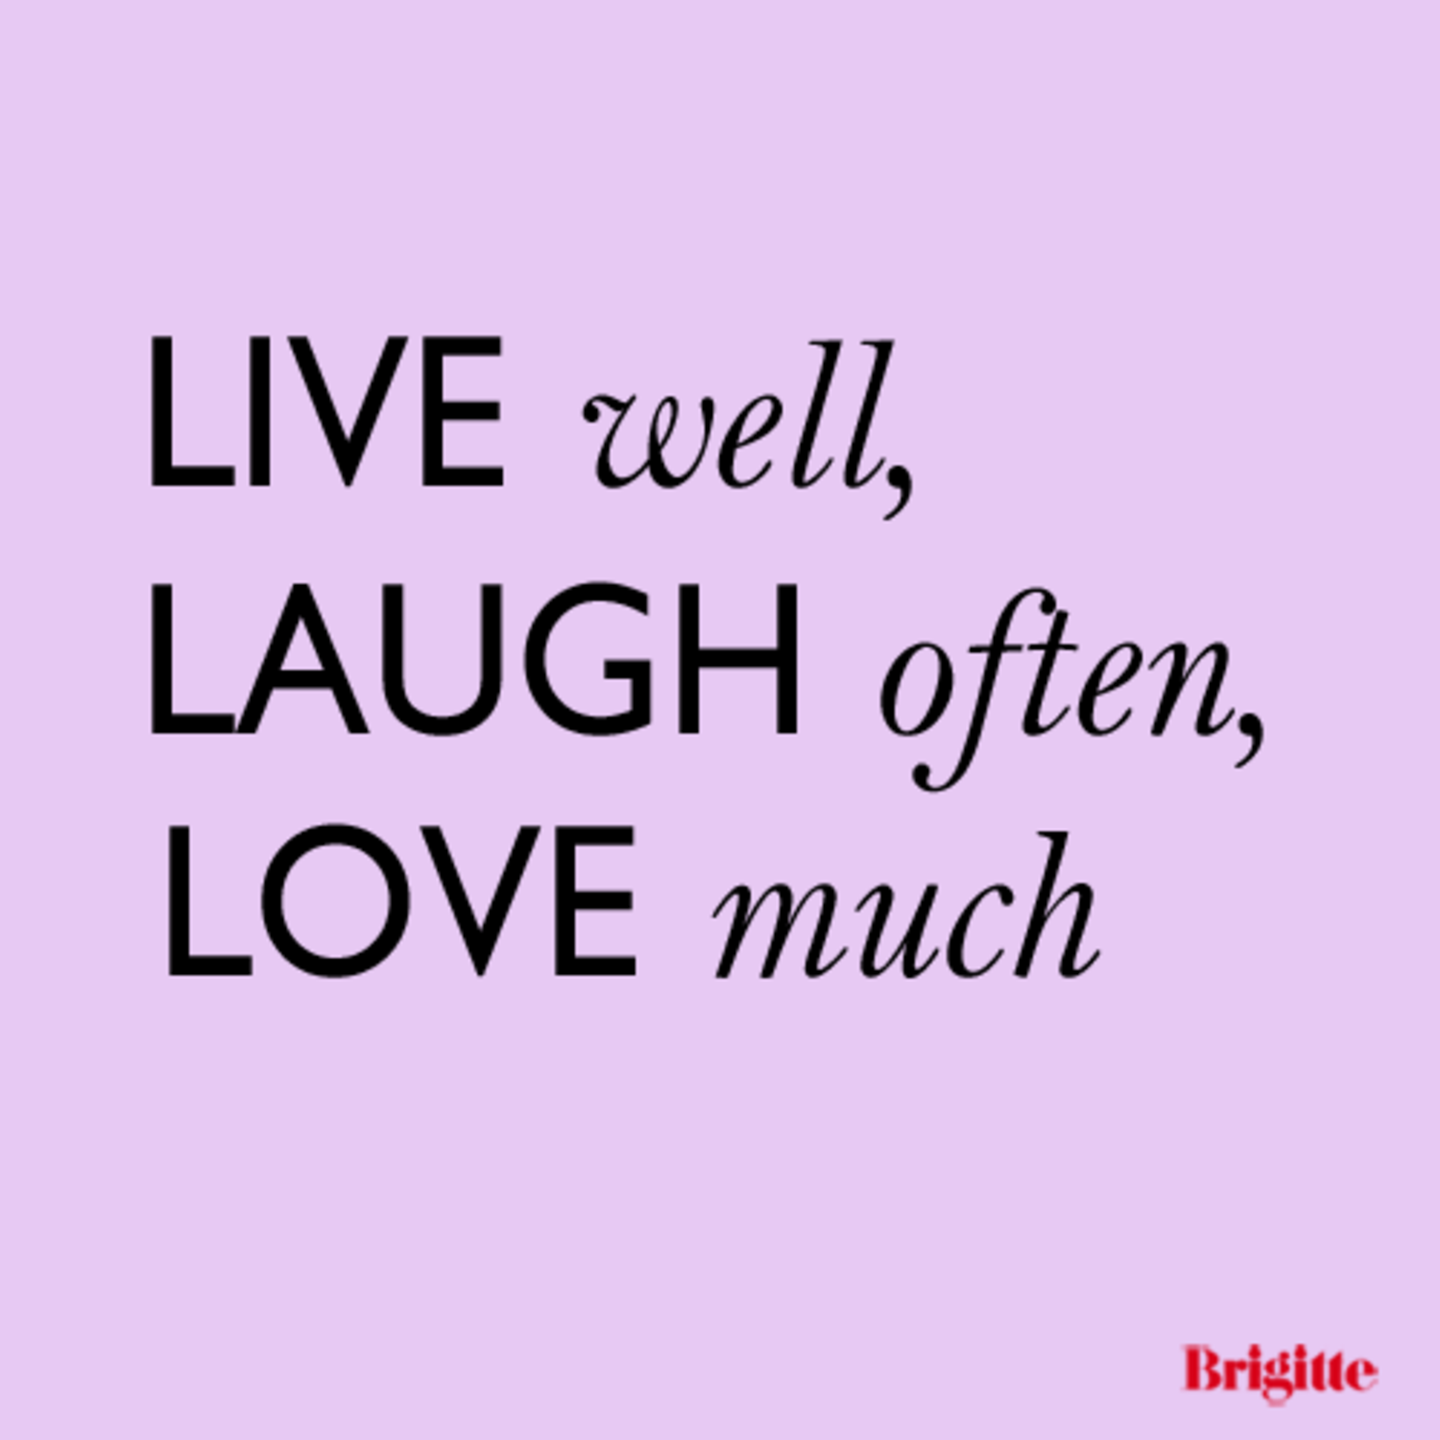 LIVE well, LAUGH often, LOVE much